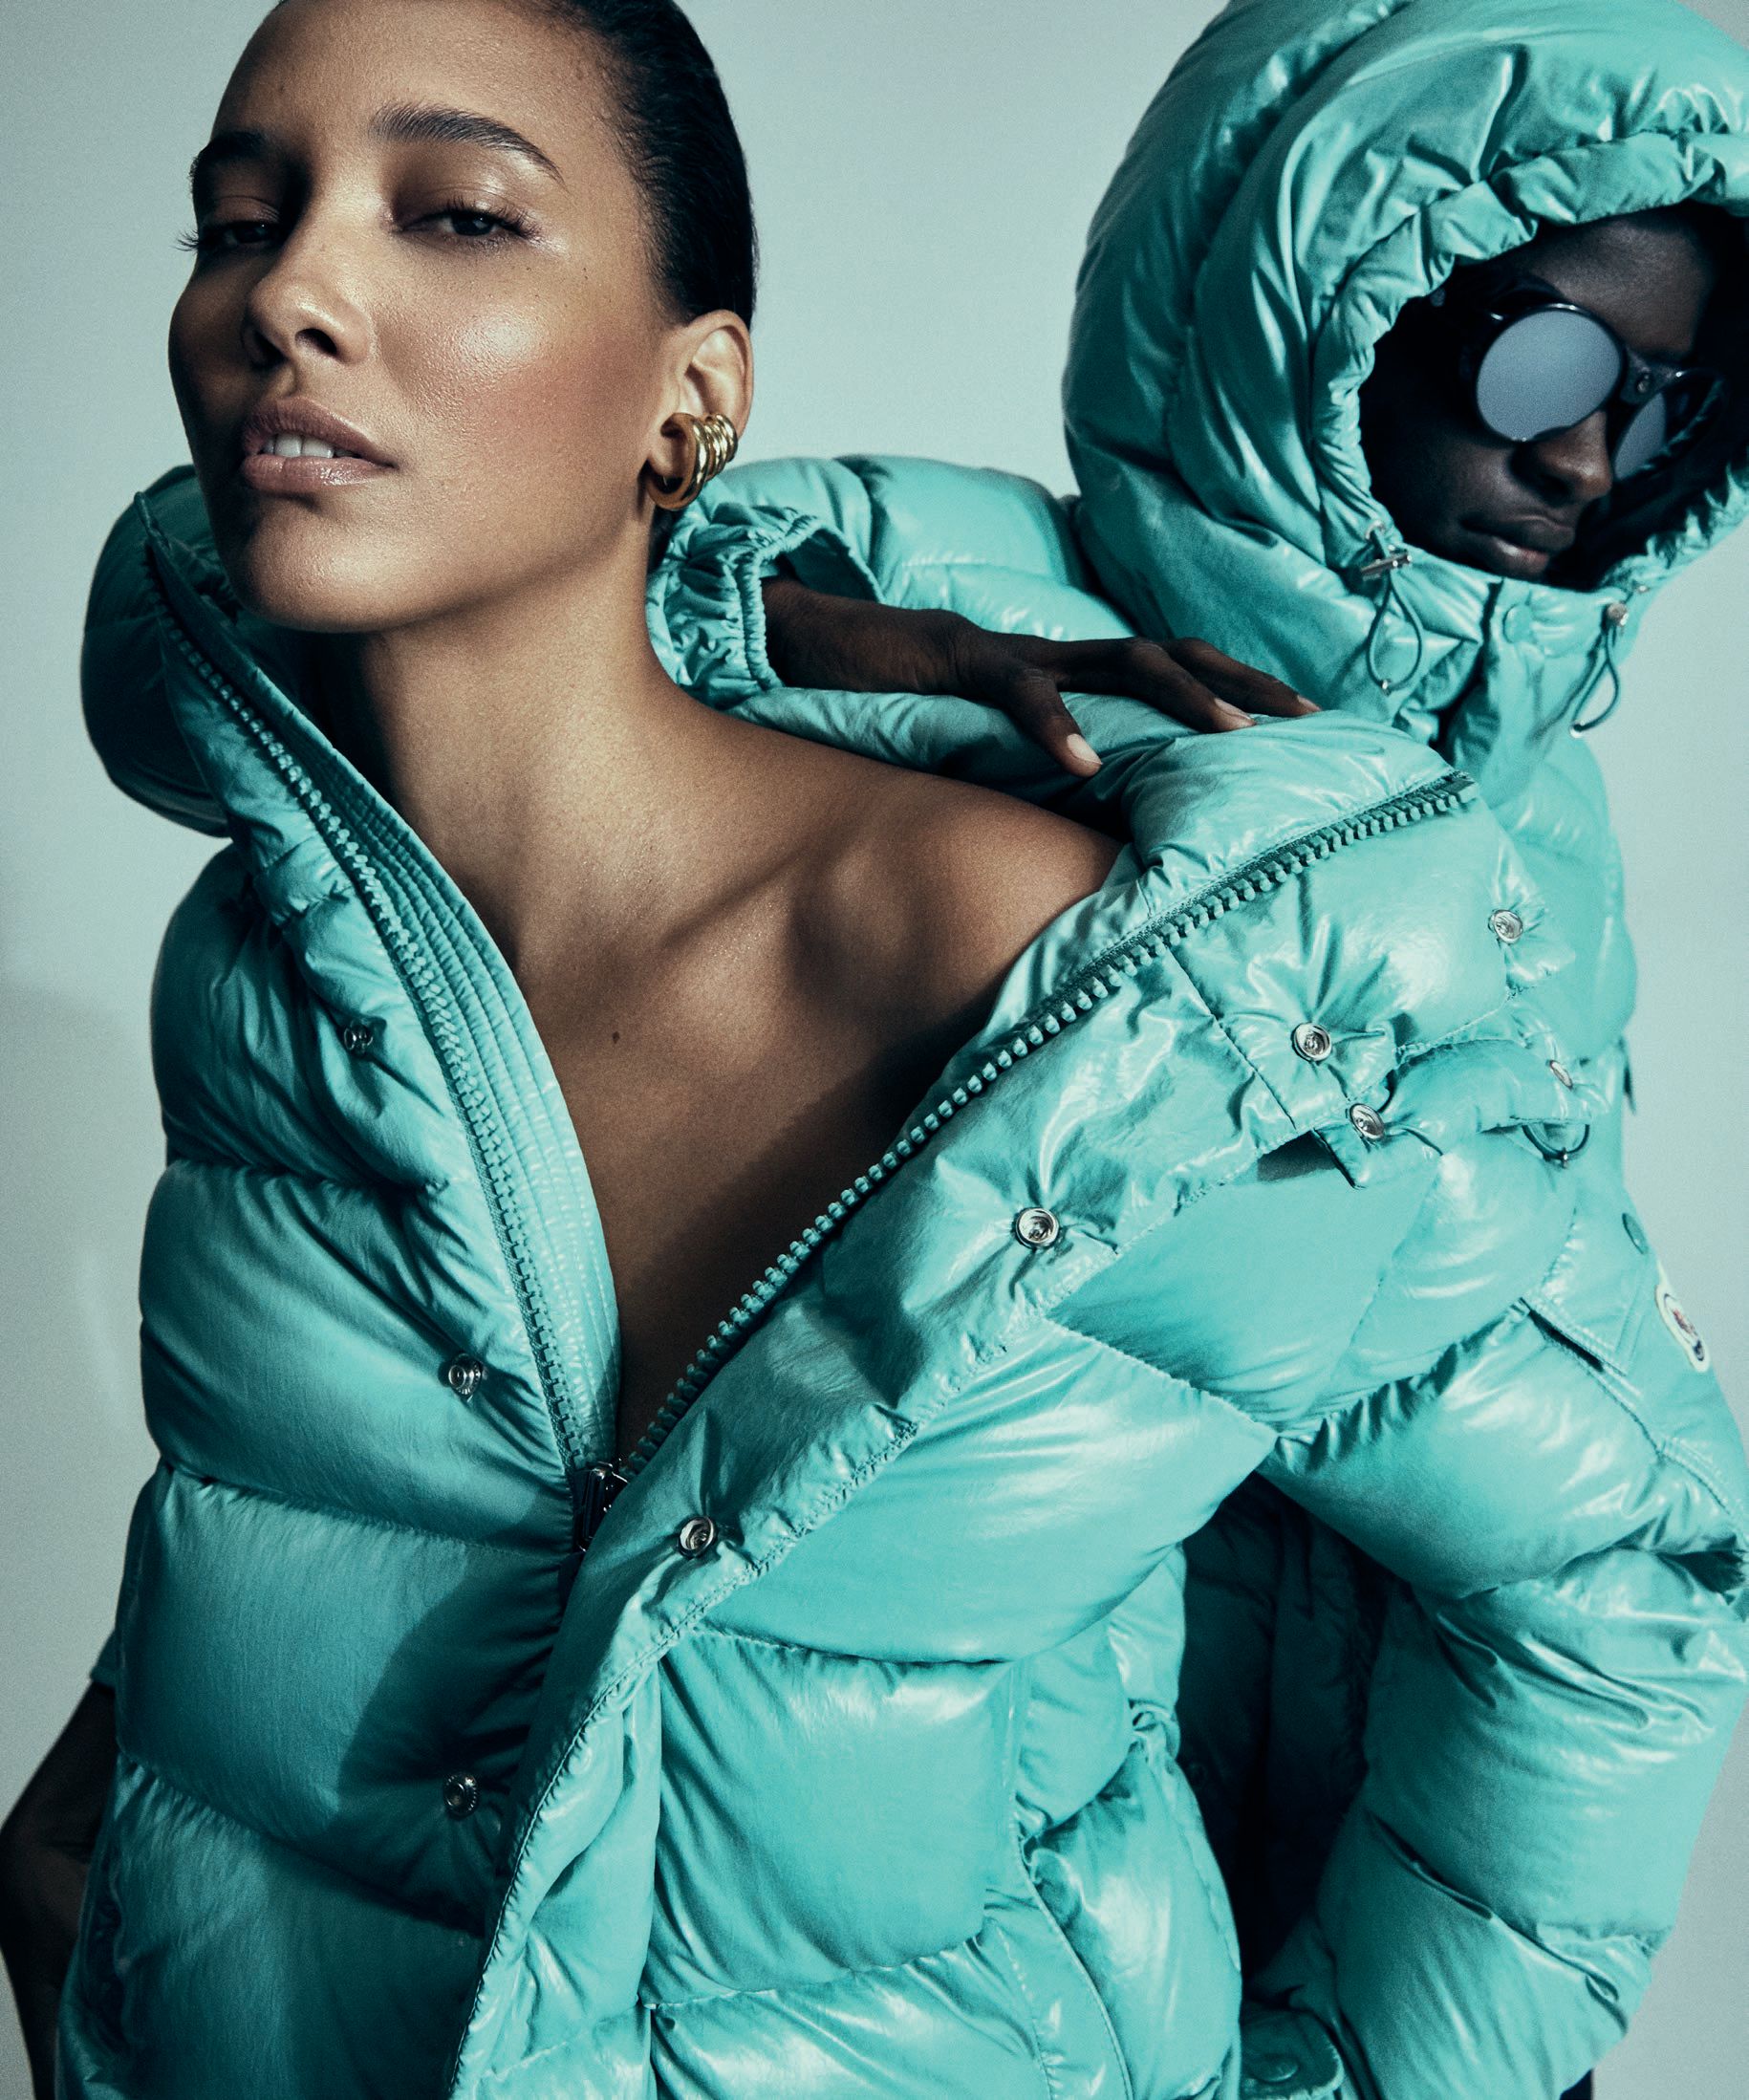 From left: Moncler Maya 70 down jacket in Lichen Green (on both) with Moncler Steradian rounded lunettes, moncler.com. Photographed by Yossi Michaeli Styled by Faye Power Vande Vrede